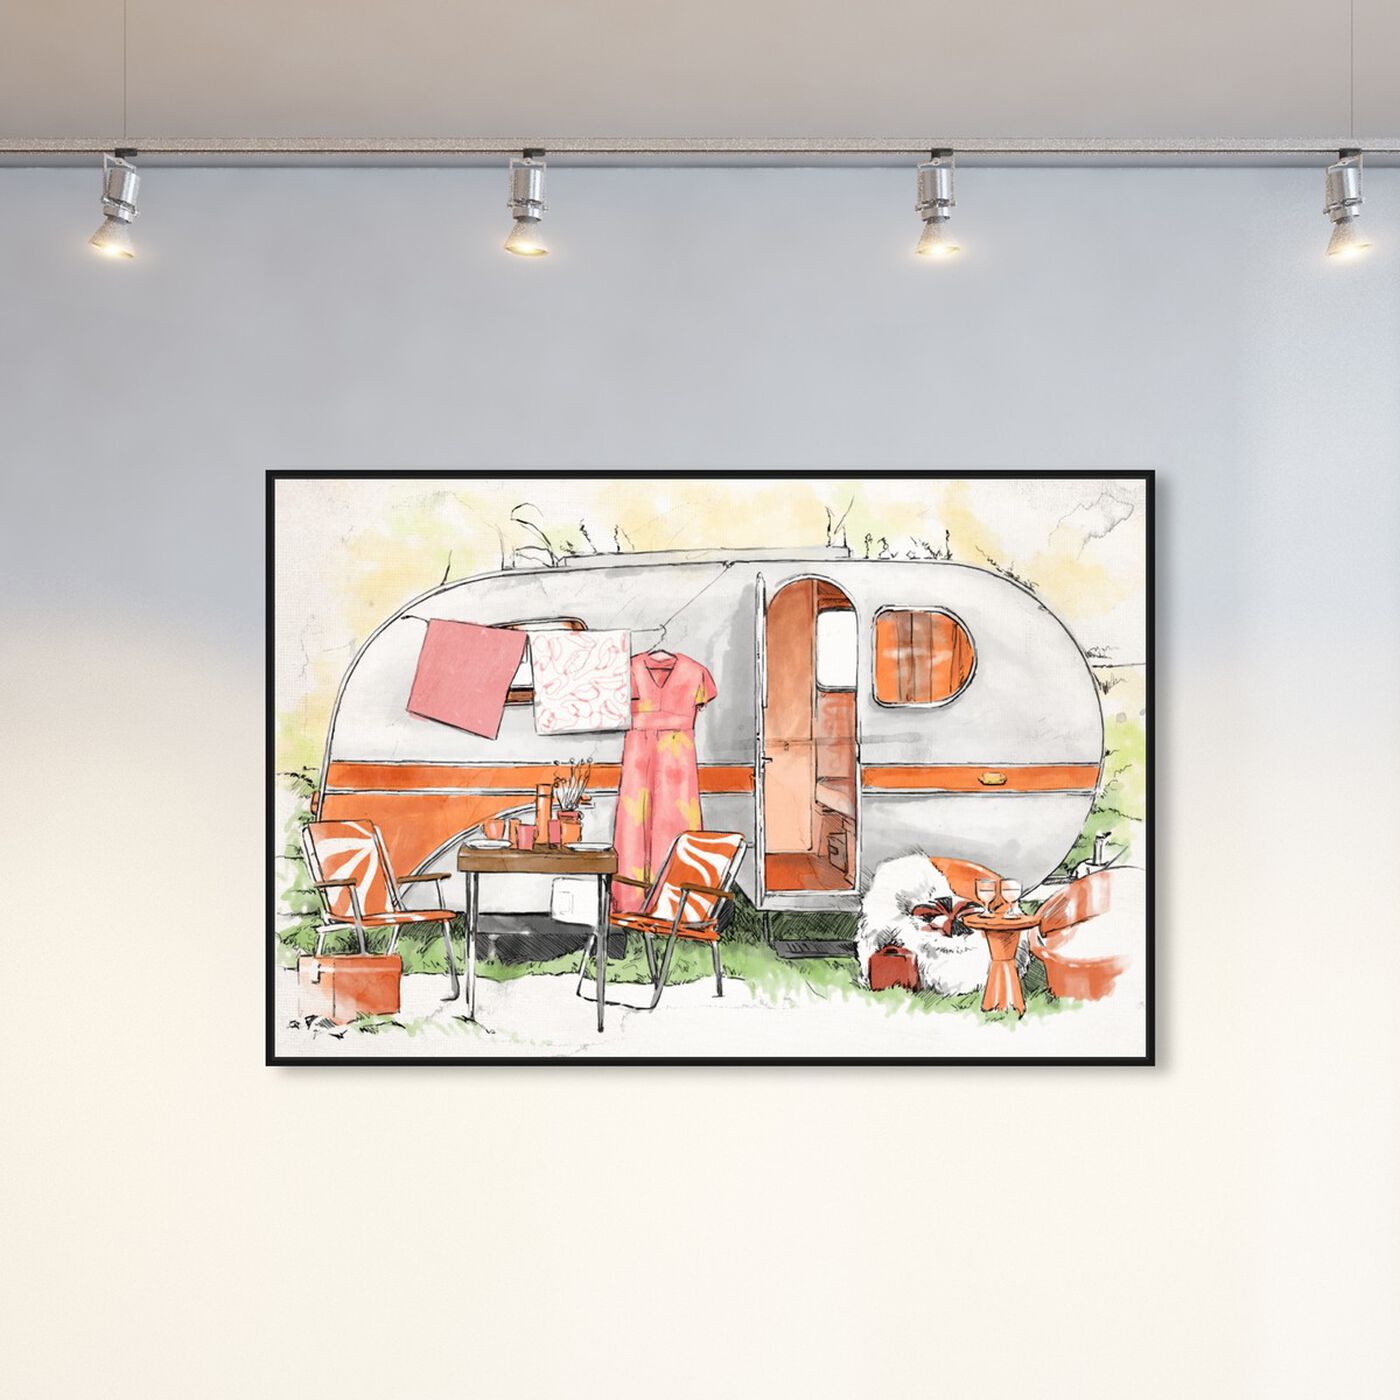 Hanging view of Orange Camper featuring transportation and trucks and busses art.